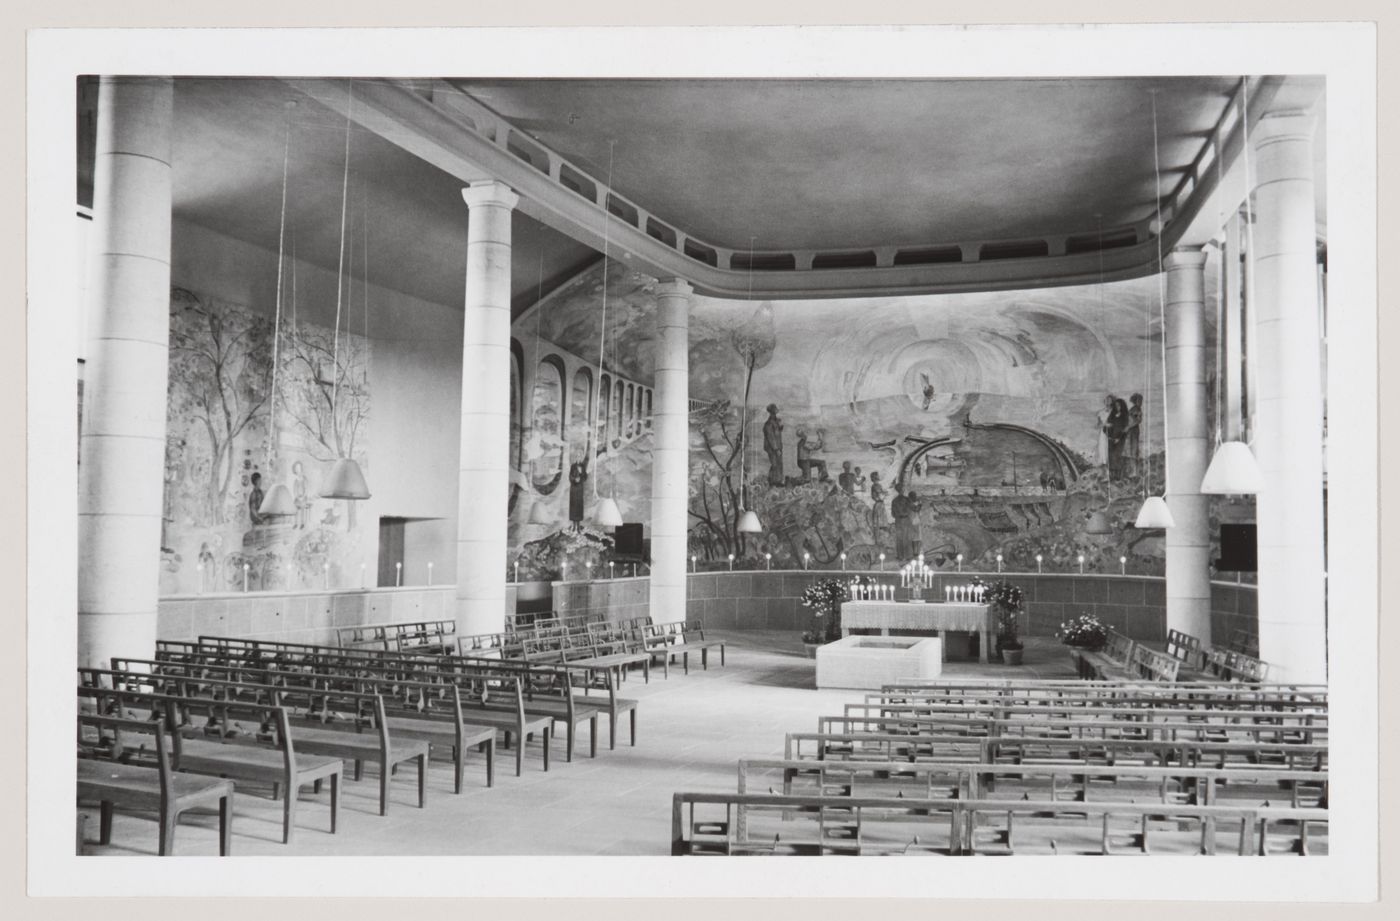 Interior view of the Chapel of the Holy Cross showing pews, the altar and the fresco designed by Sven Erixson, Woodland Crematorium and Cemetery, Stockholm